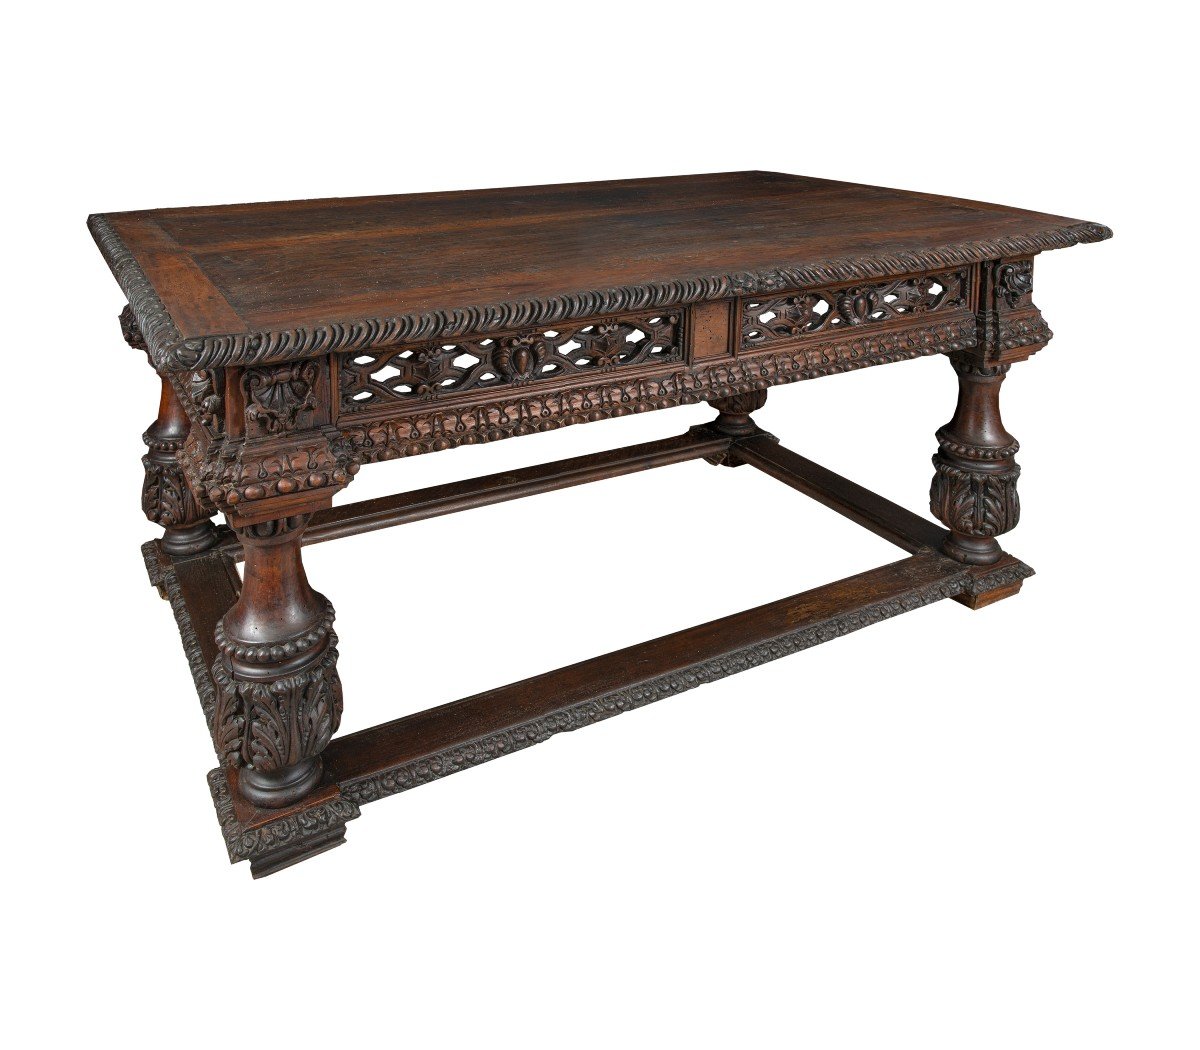 Large Carved Wooden Desk Table. Central Europe, Late 16th - Early 17th Century.-photo-2